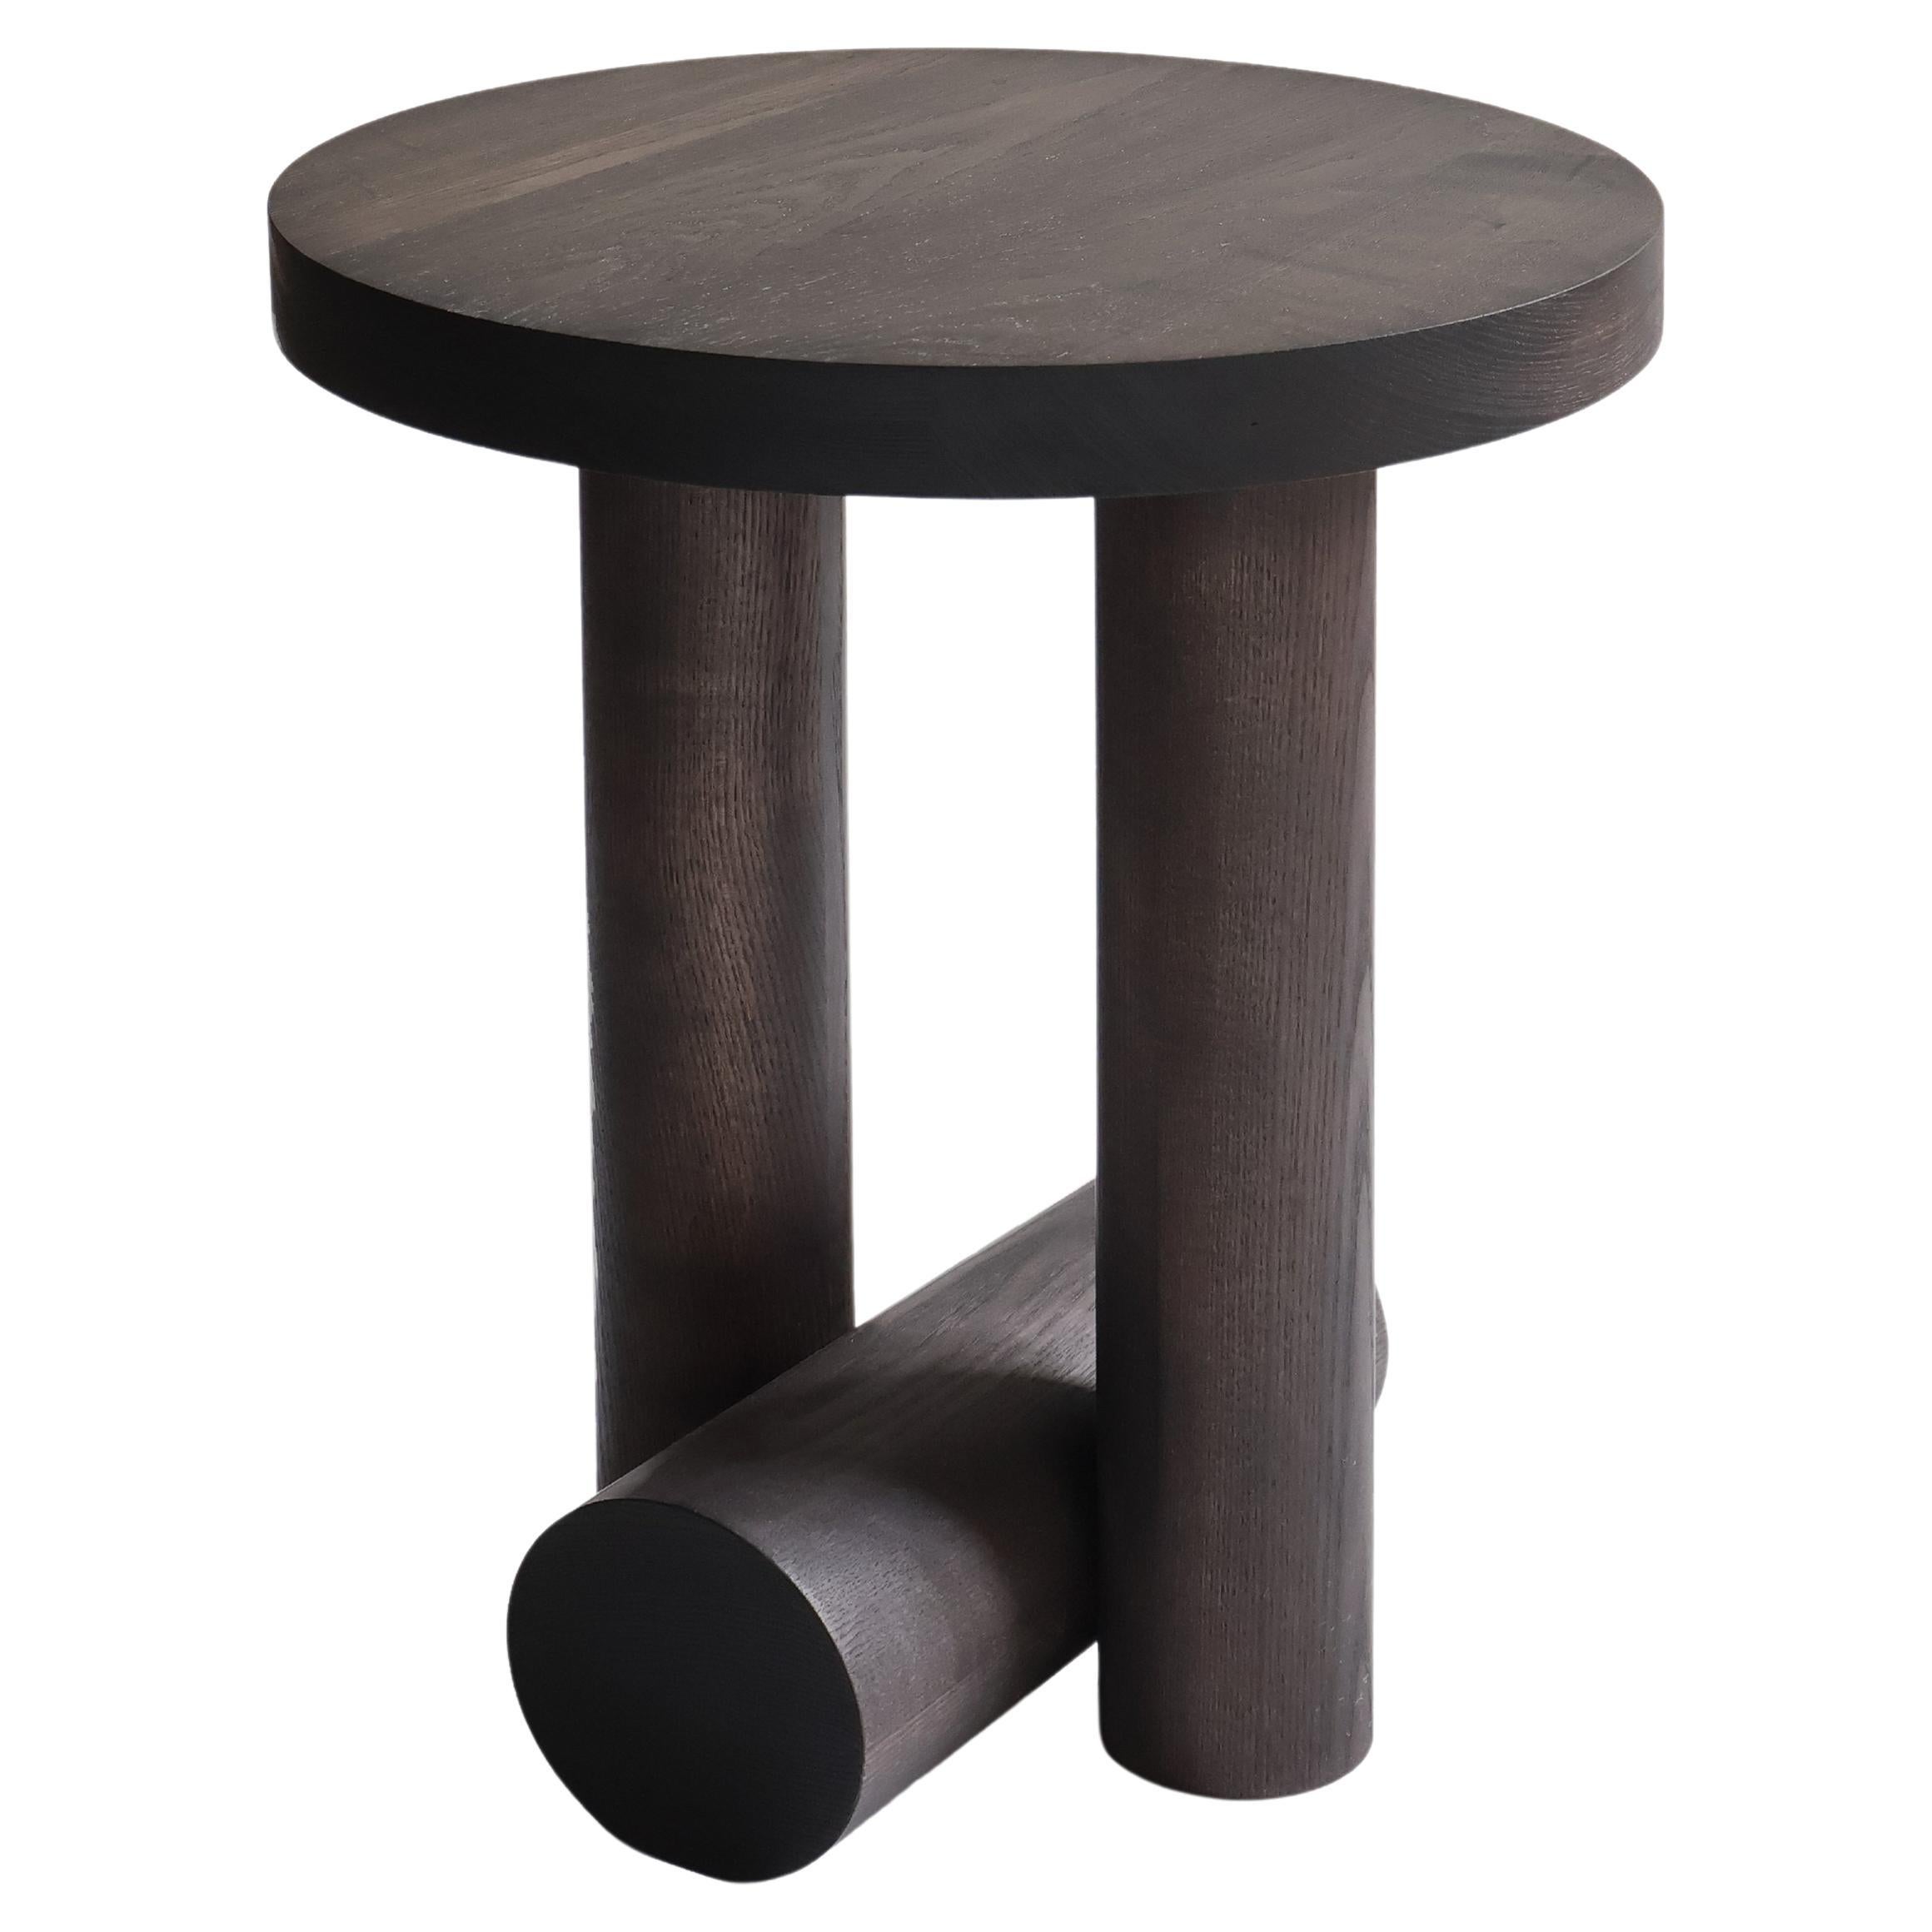 Origin Made Evora Side Table in Smoked Ash For Sale